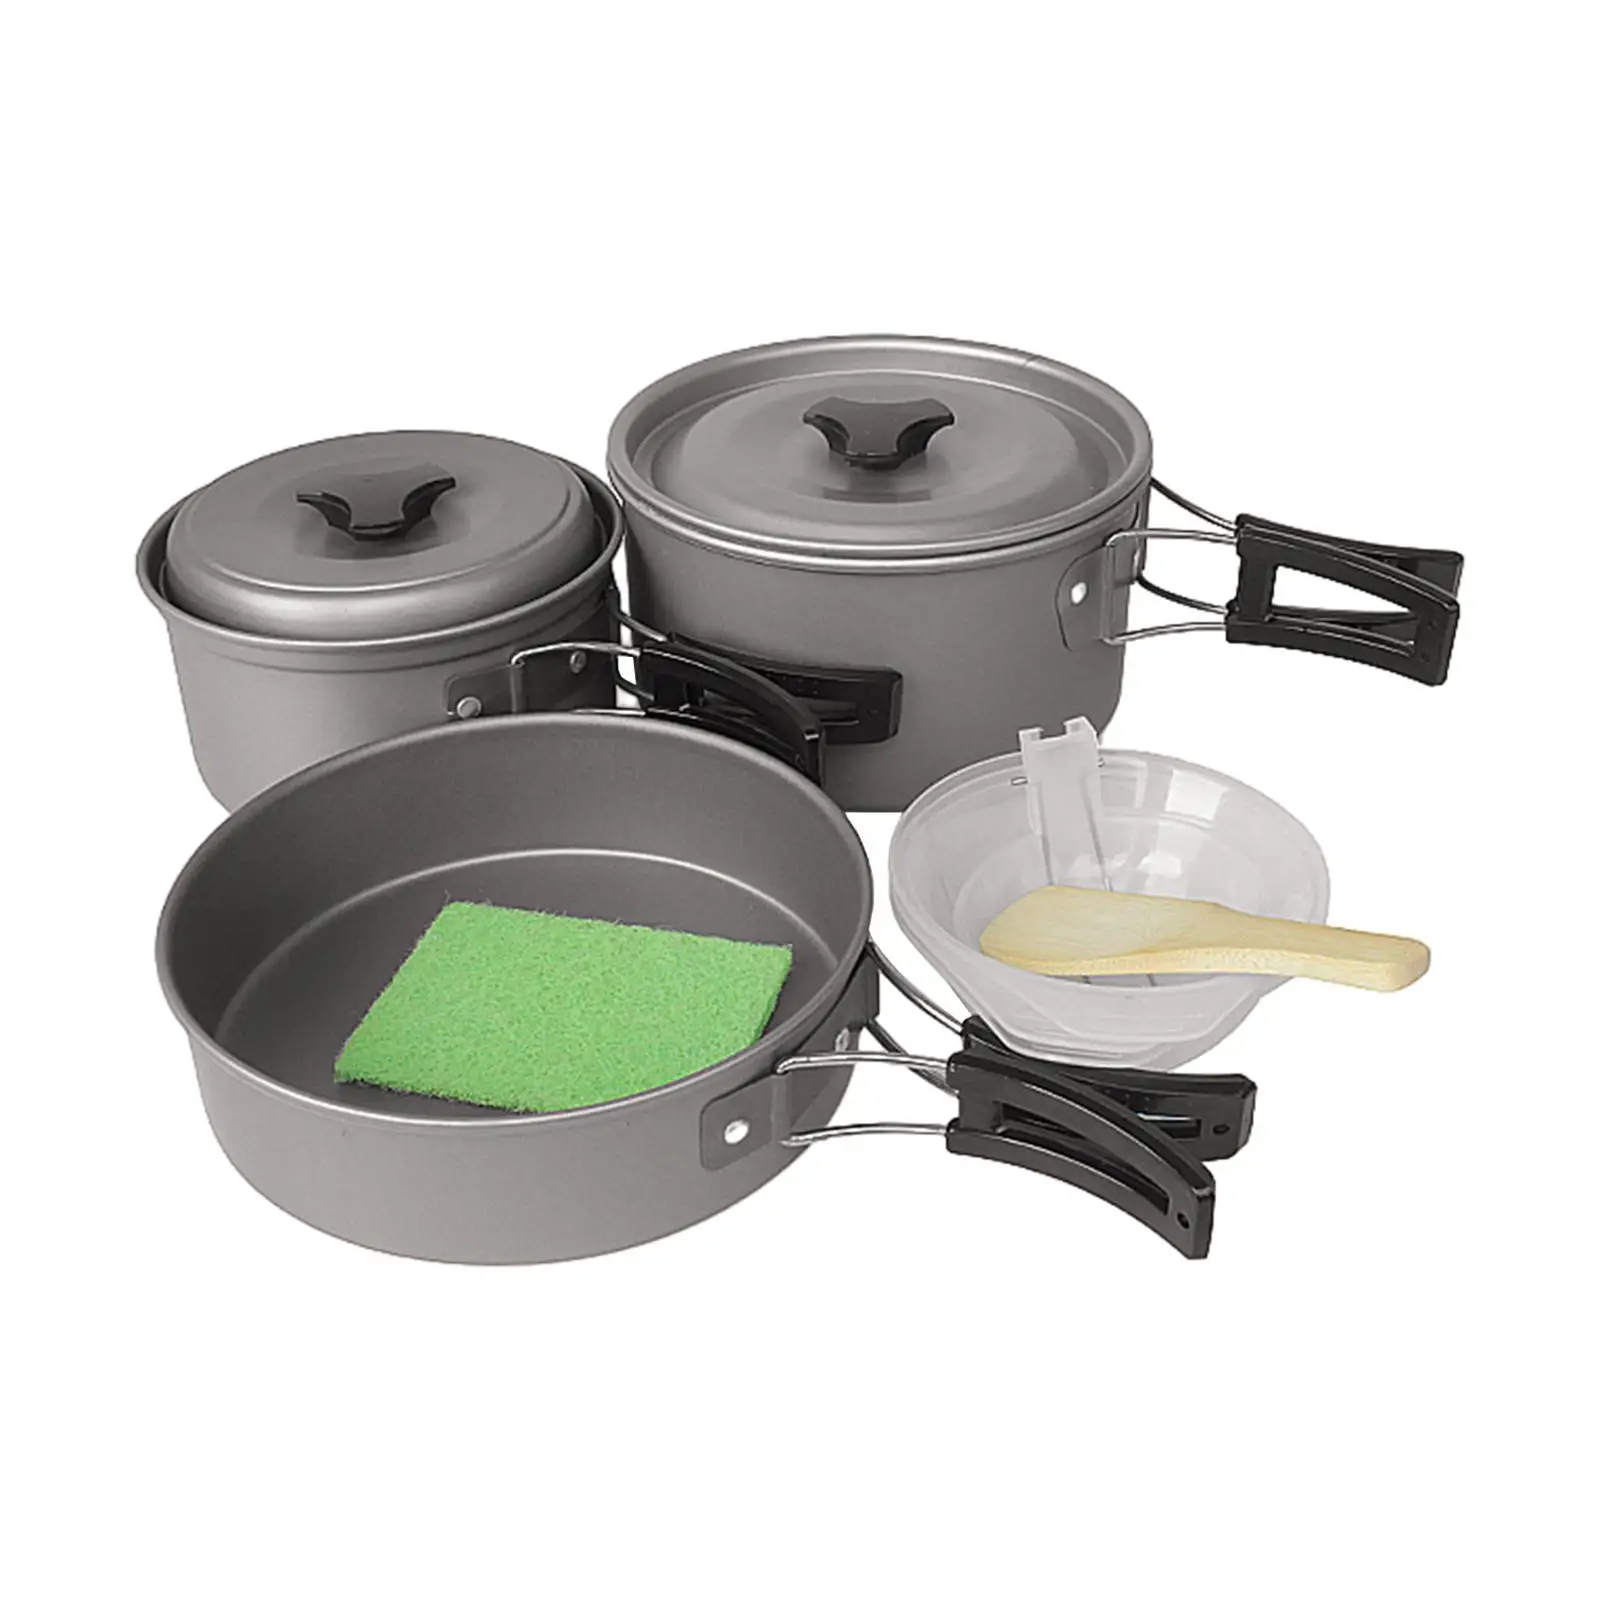 Camping Cookware Mess Set with Bowls Frying Pan for Camp Backpacking Hiking